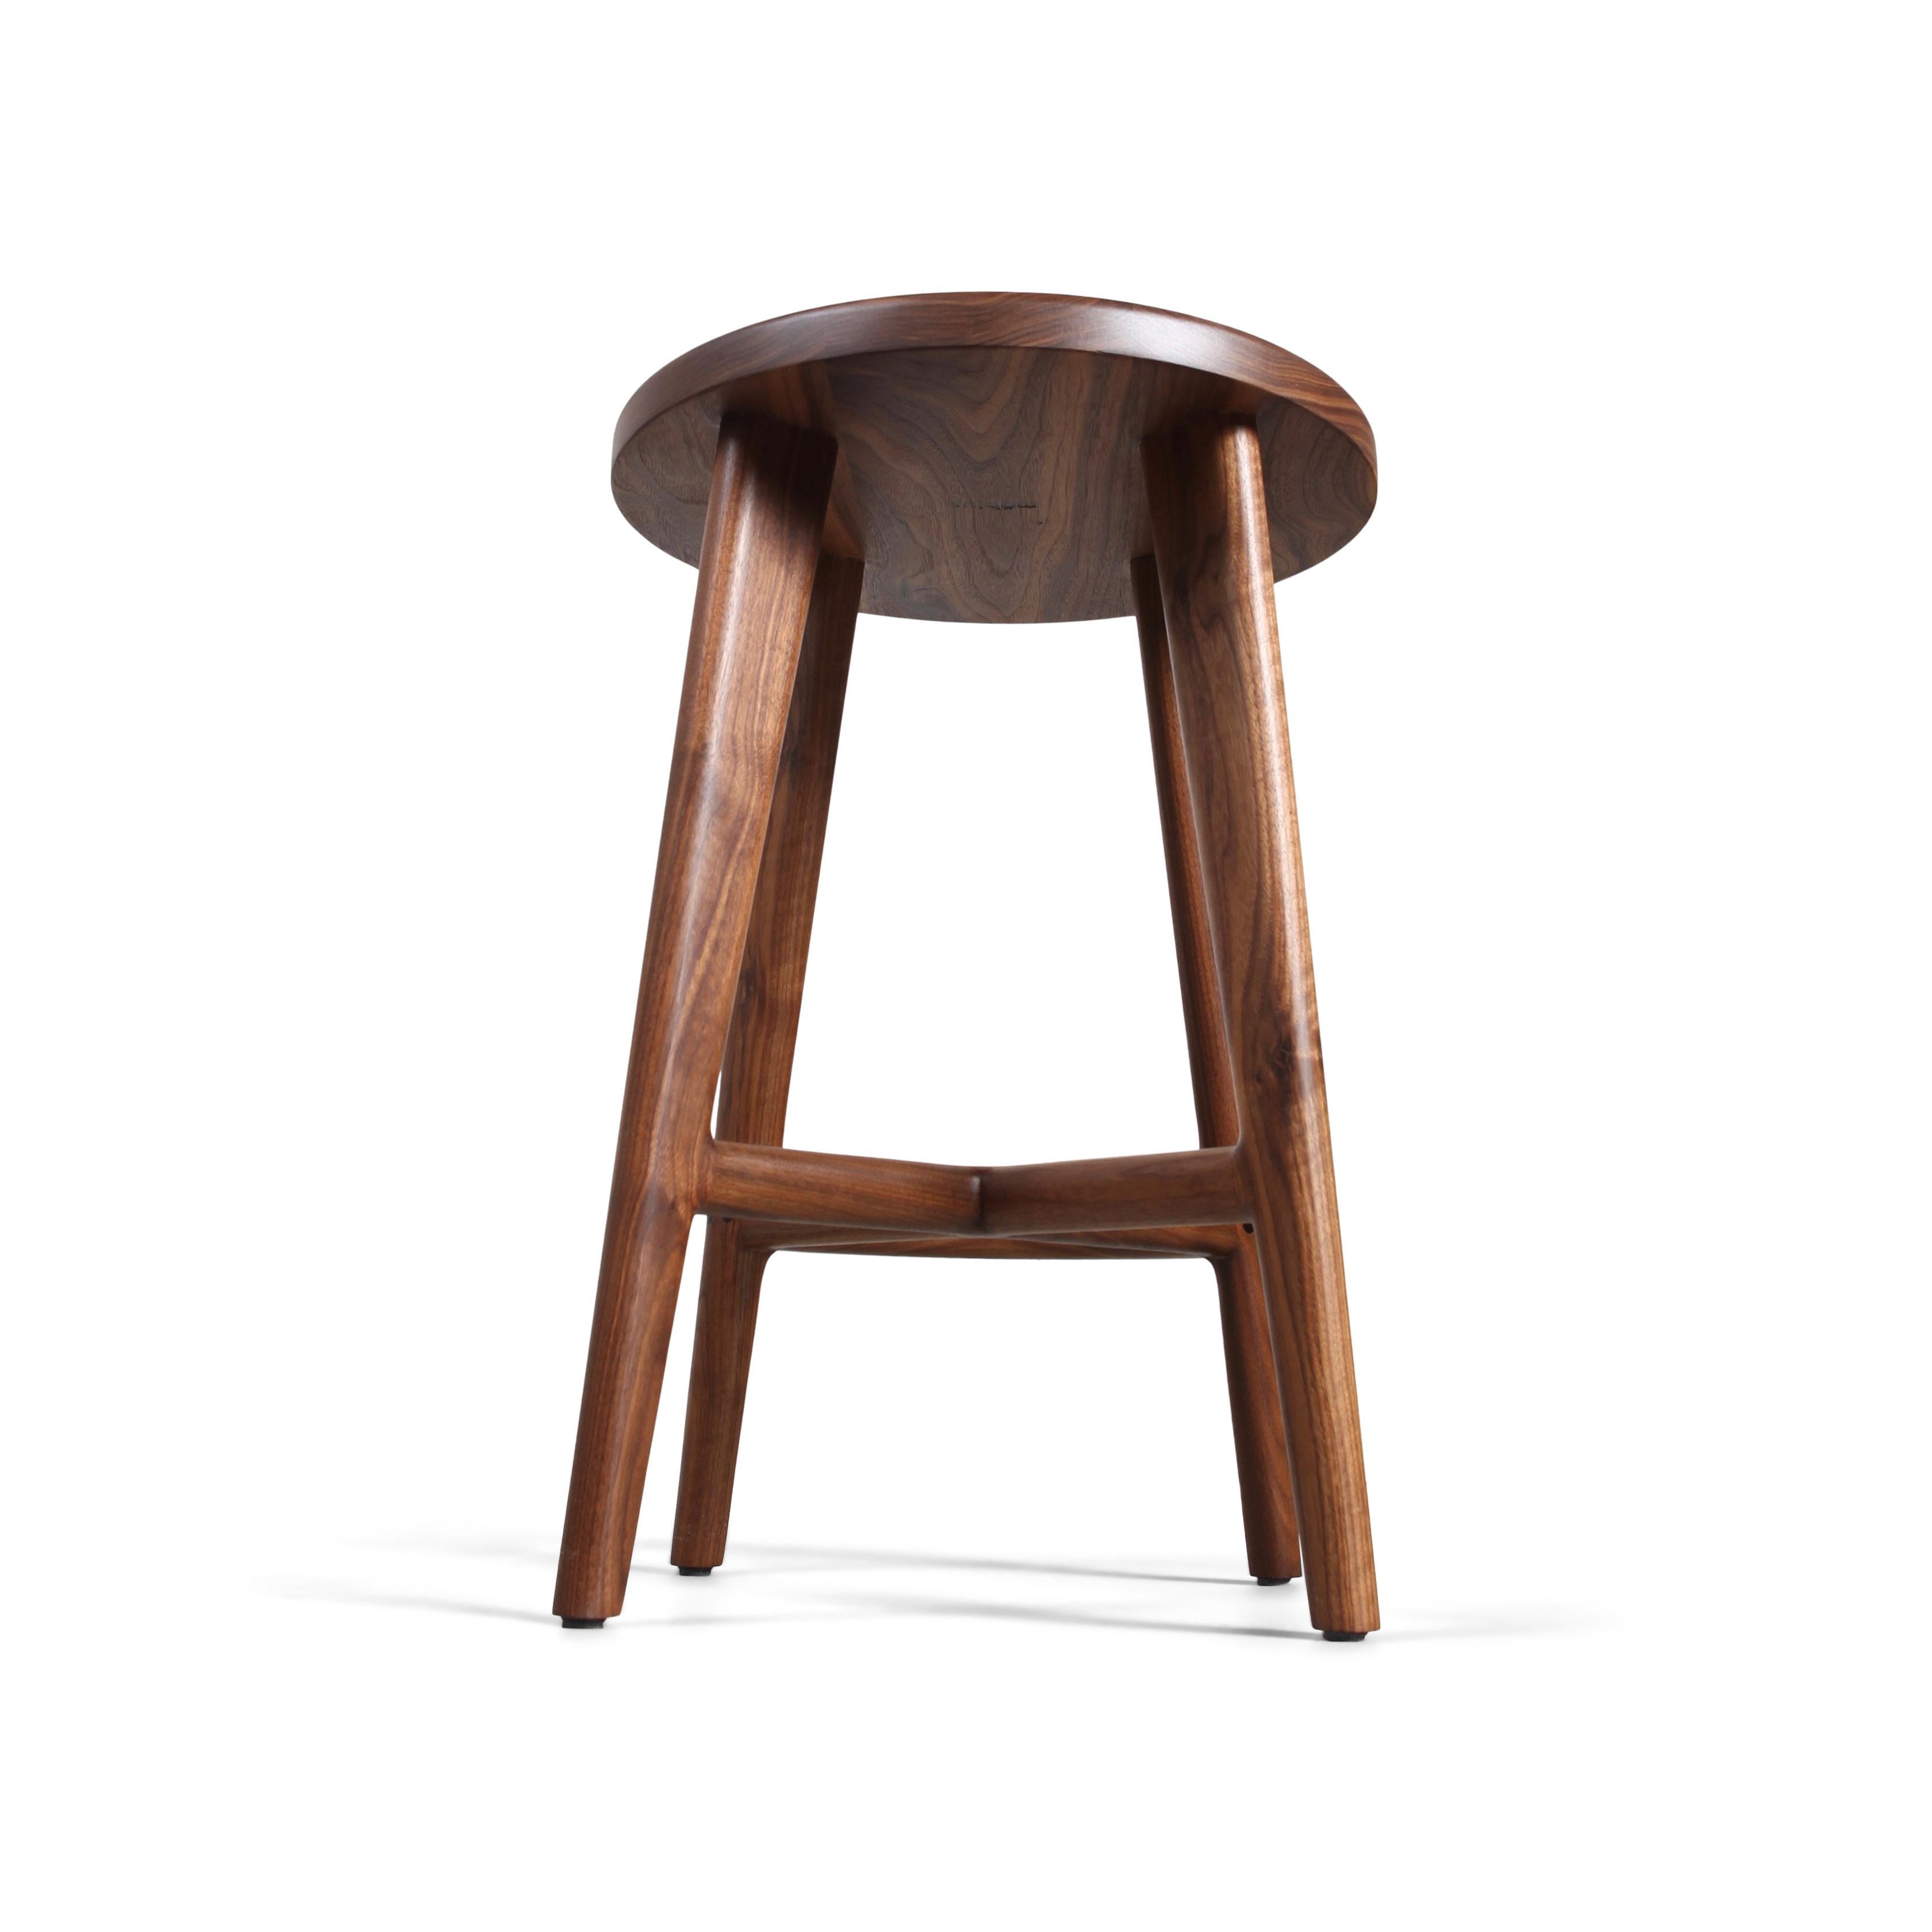 Canadian Handcrafted Solid Wood Bar or Counter Stools, Walnut - (Set of 2) Ready to Ship For Sale